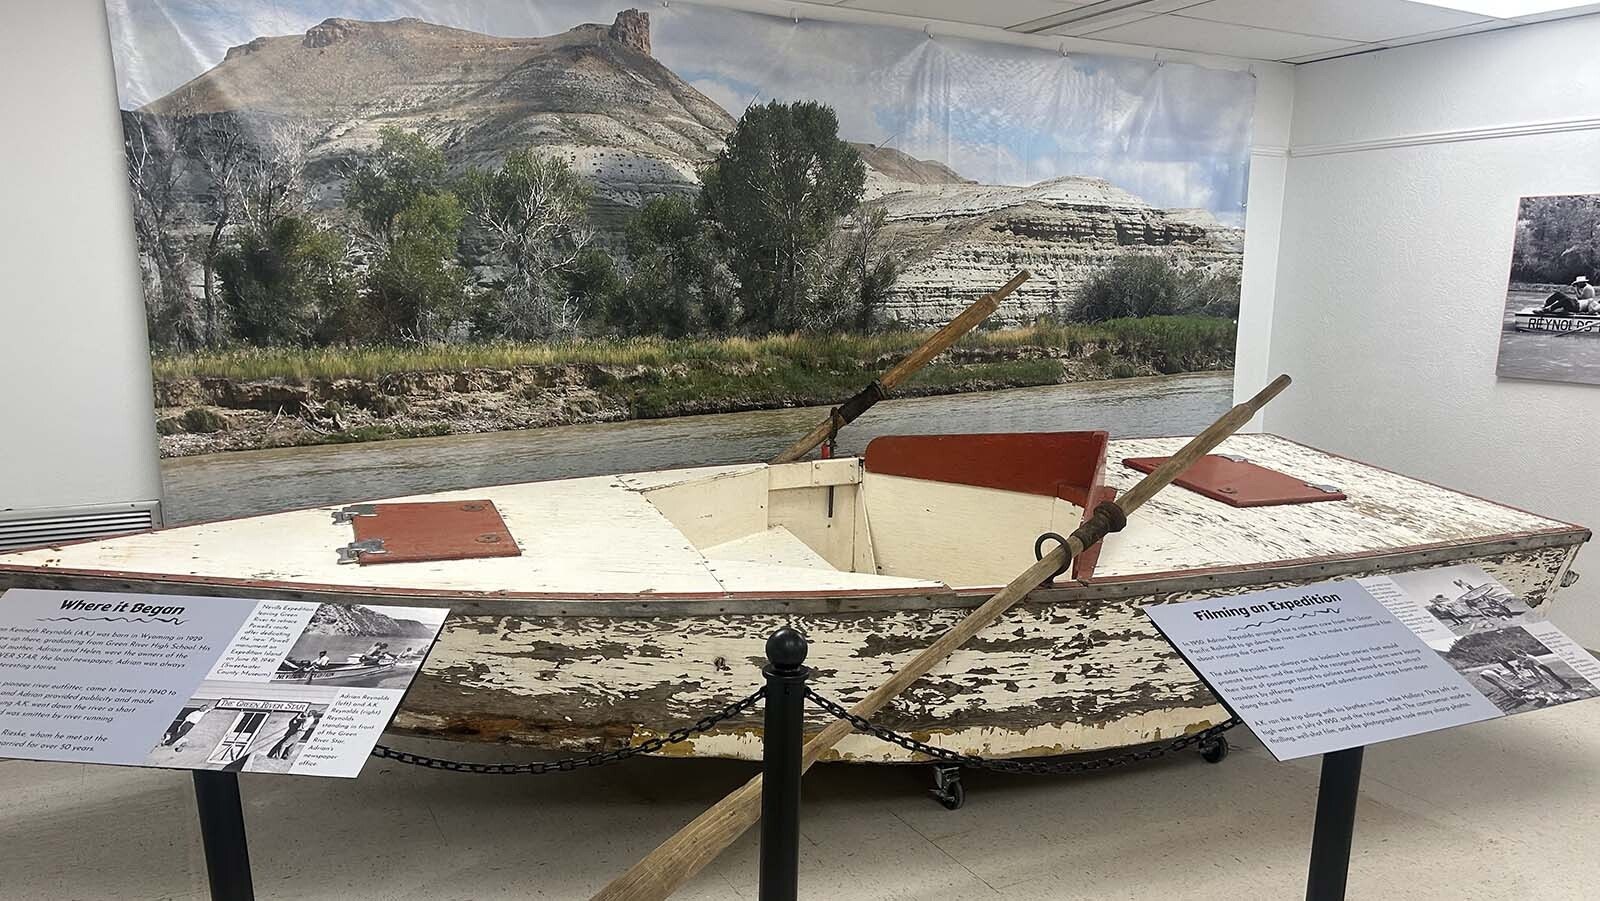 A cataract boat owned by A.J. Reynolds is part of a new exhibit on display at the Sweetwater County Courthouse.